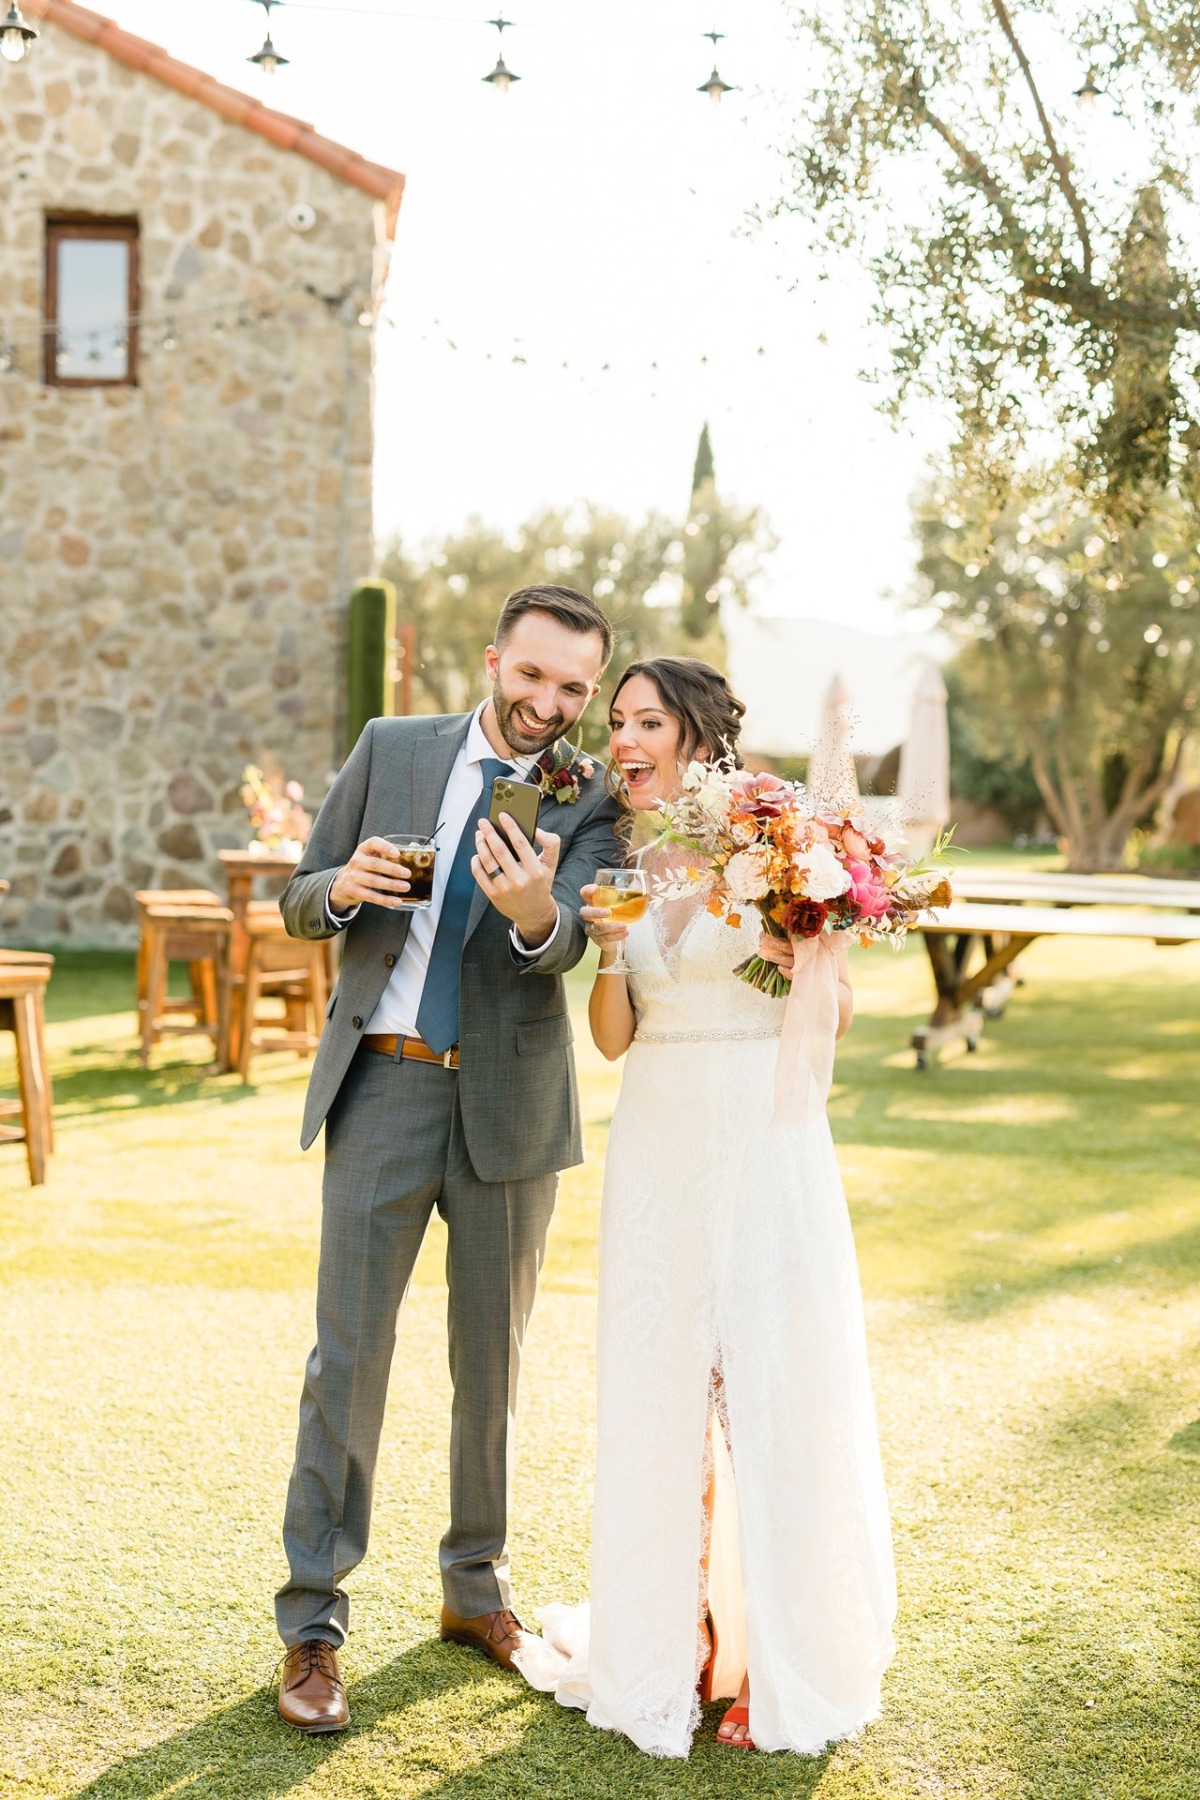 Wedding Planning Tasks You No Longer Need to Do In Person